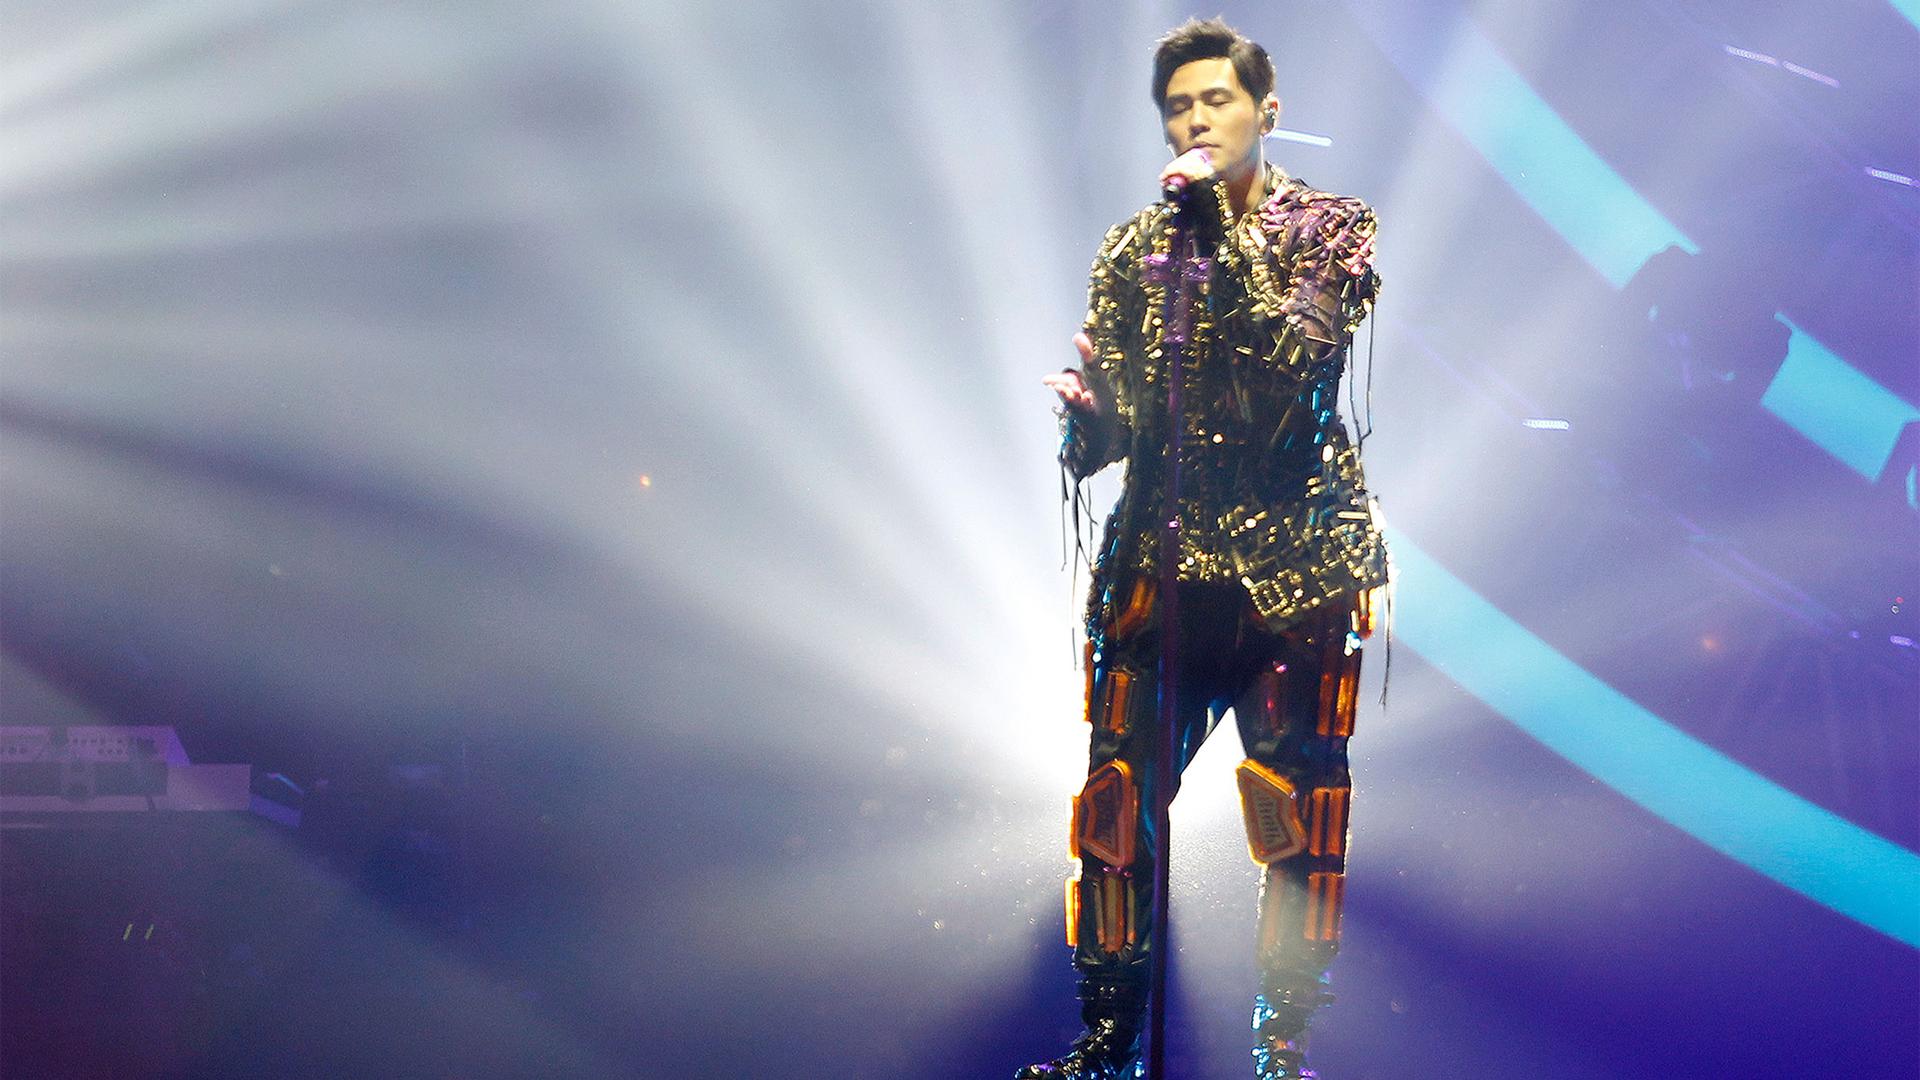 Famed Taiwanese singer Jay Chou performs during his concert "The Invincible" in Taipei, Taiwan